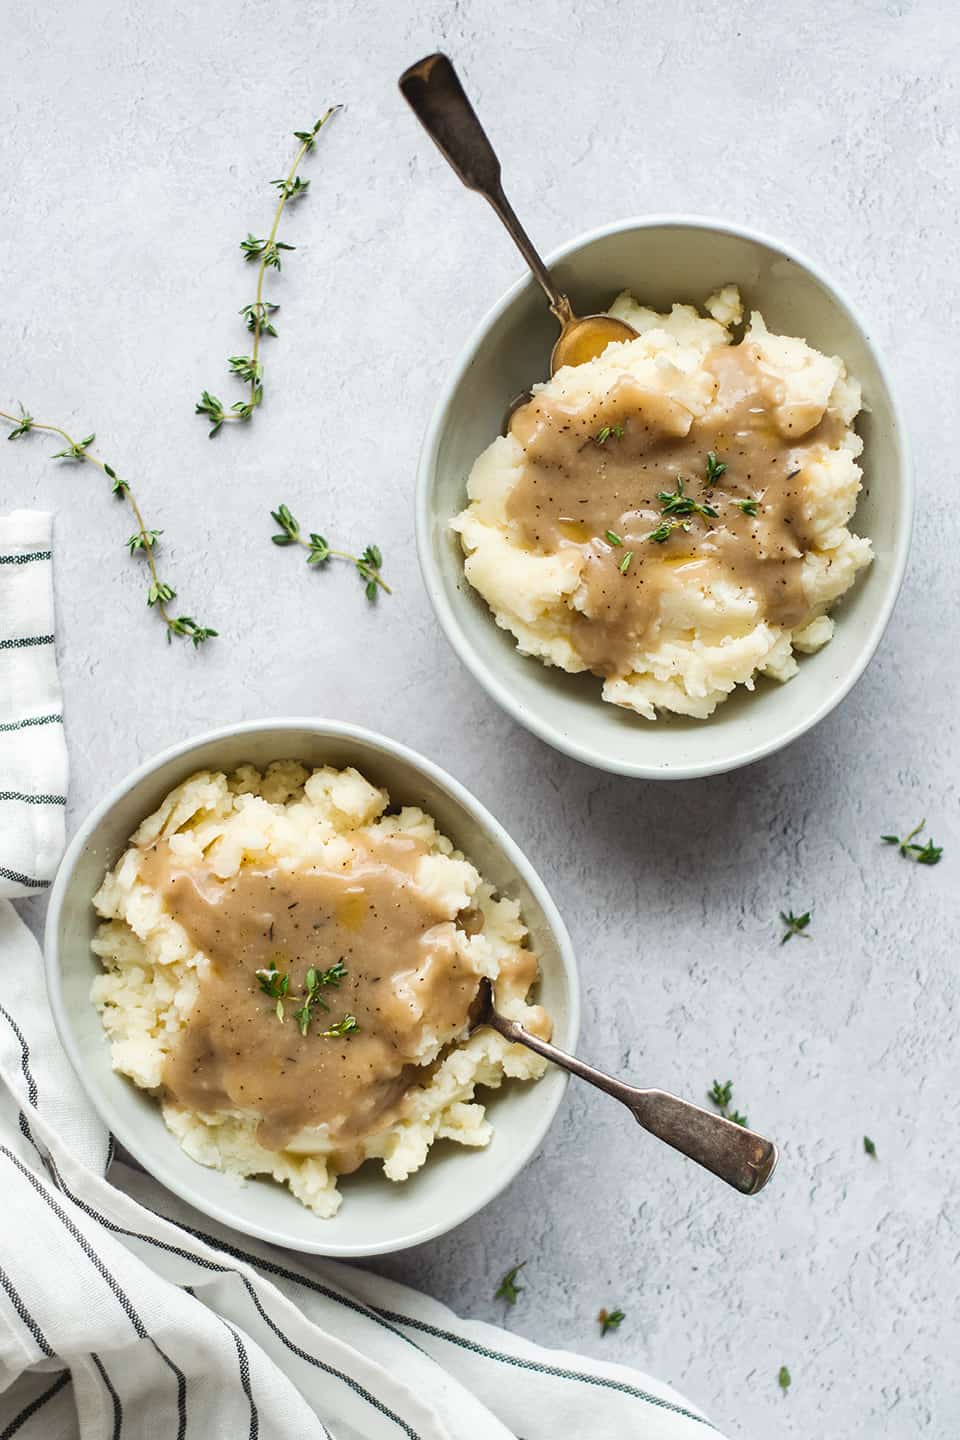 Smoked turkey gravy over mashed potatoes in a bowl.